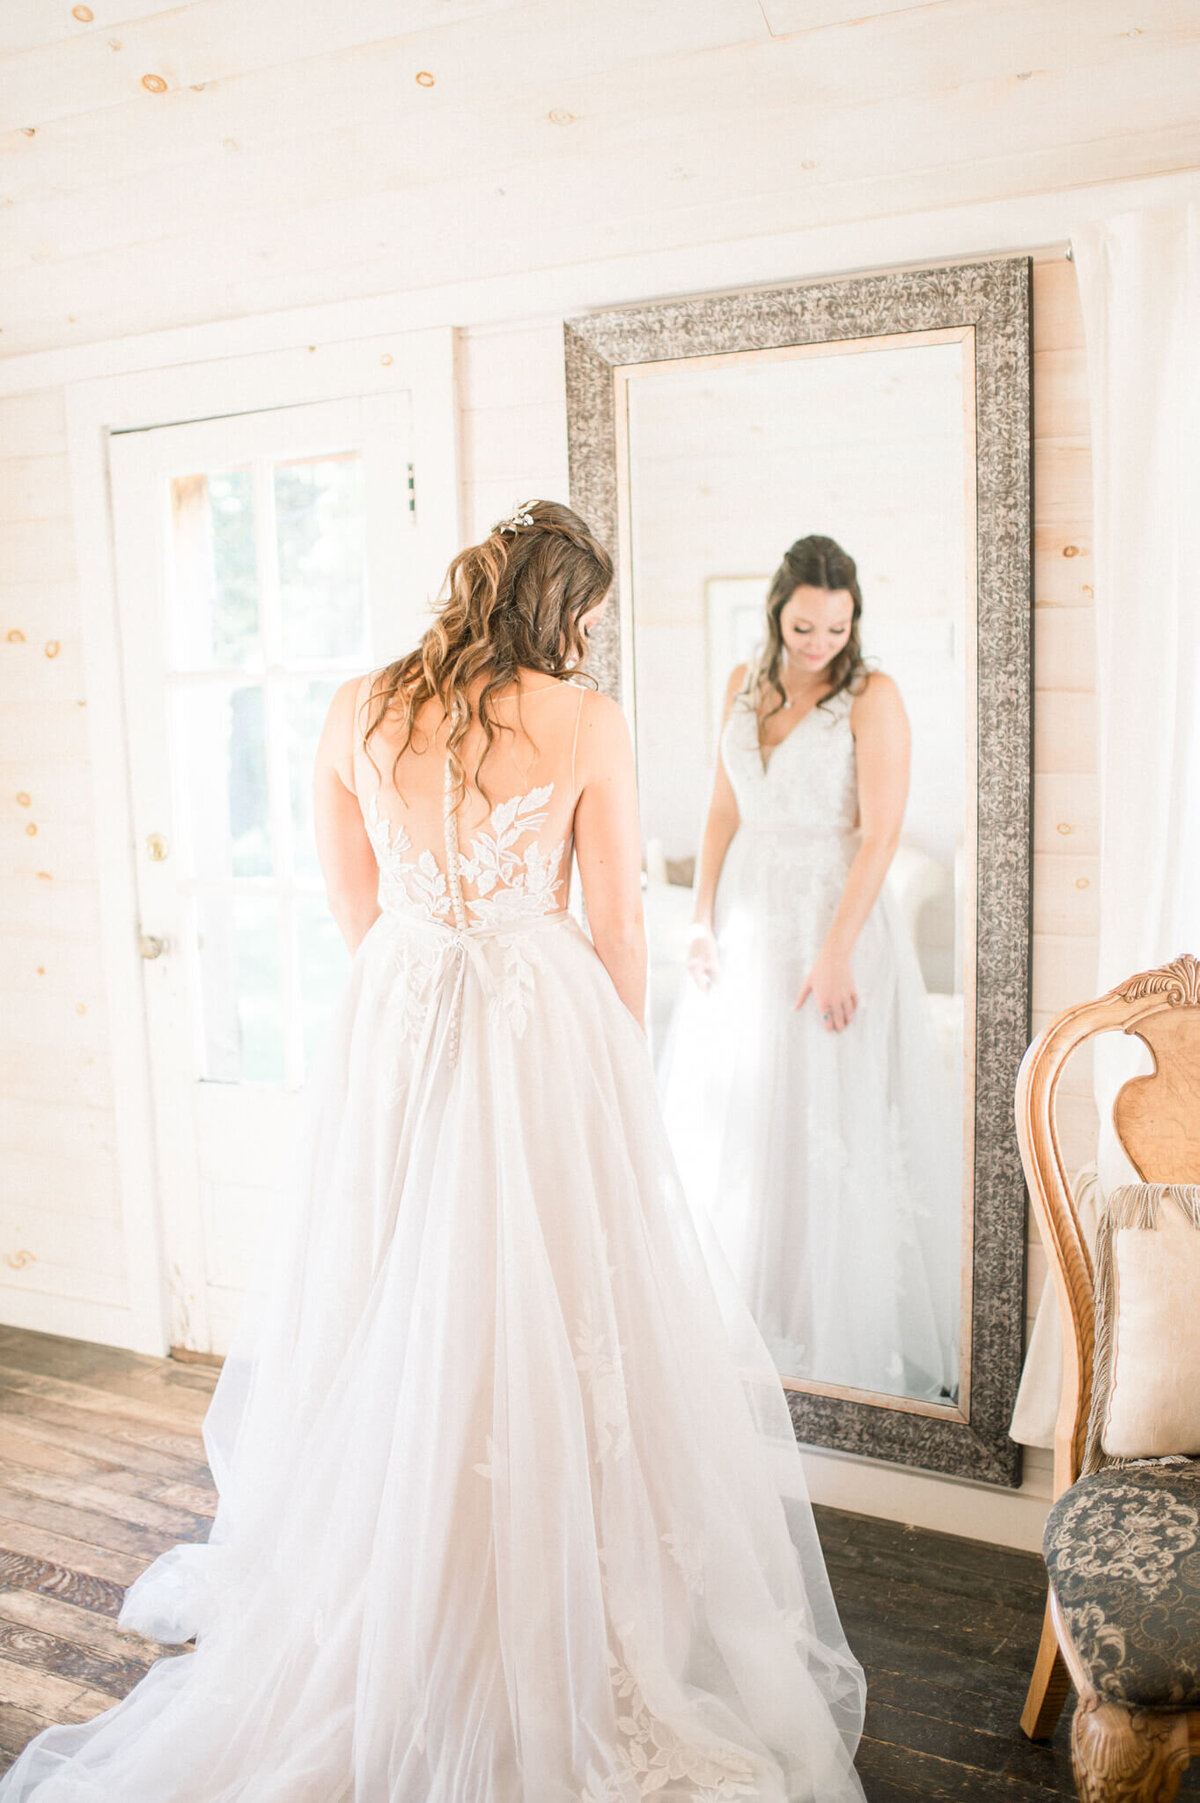 Bride looking at mirror and  fluffing her dress. Captured by Toronto wedding photographer